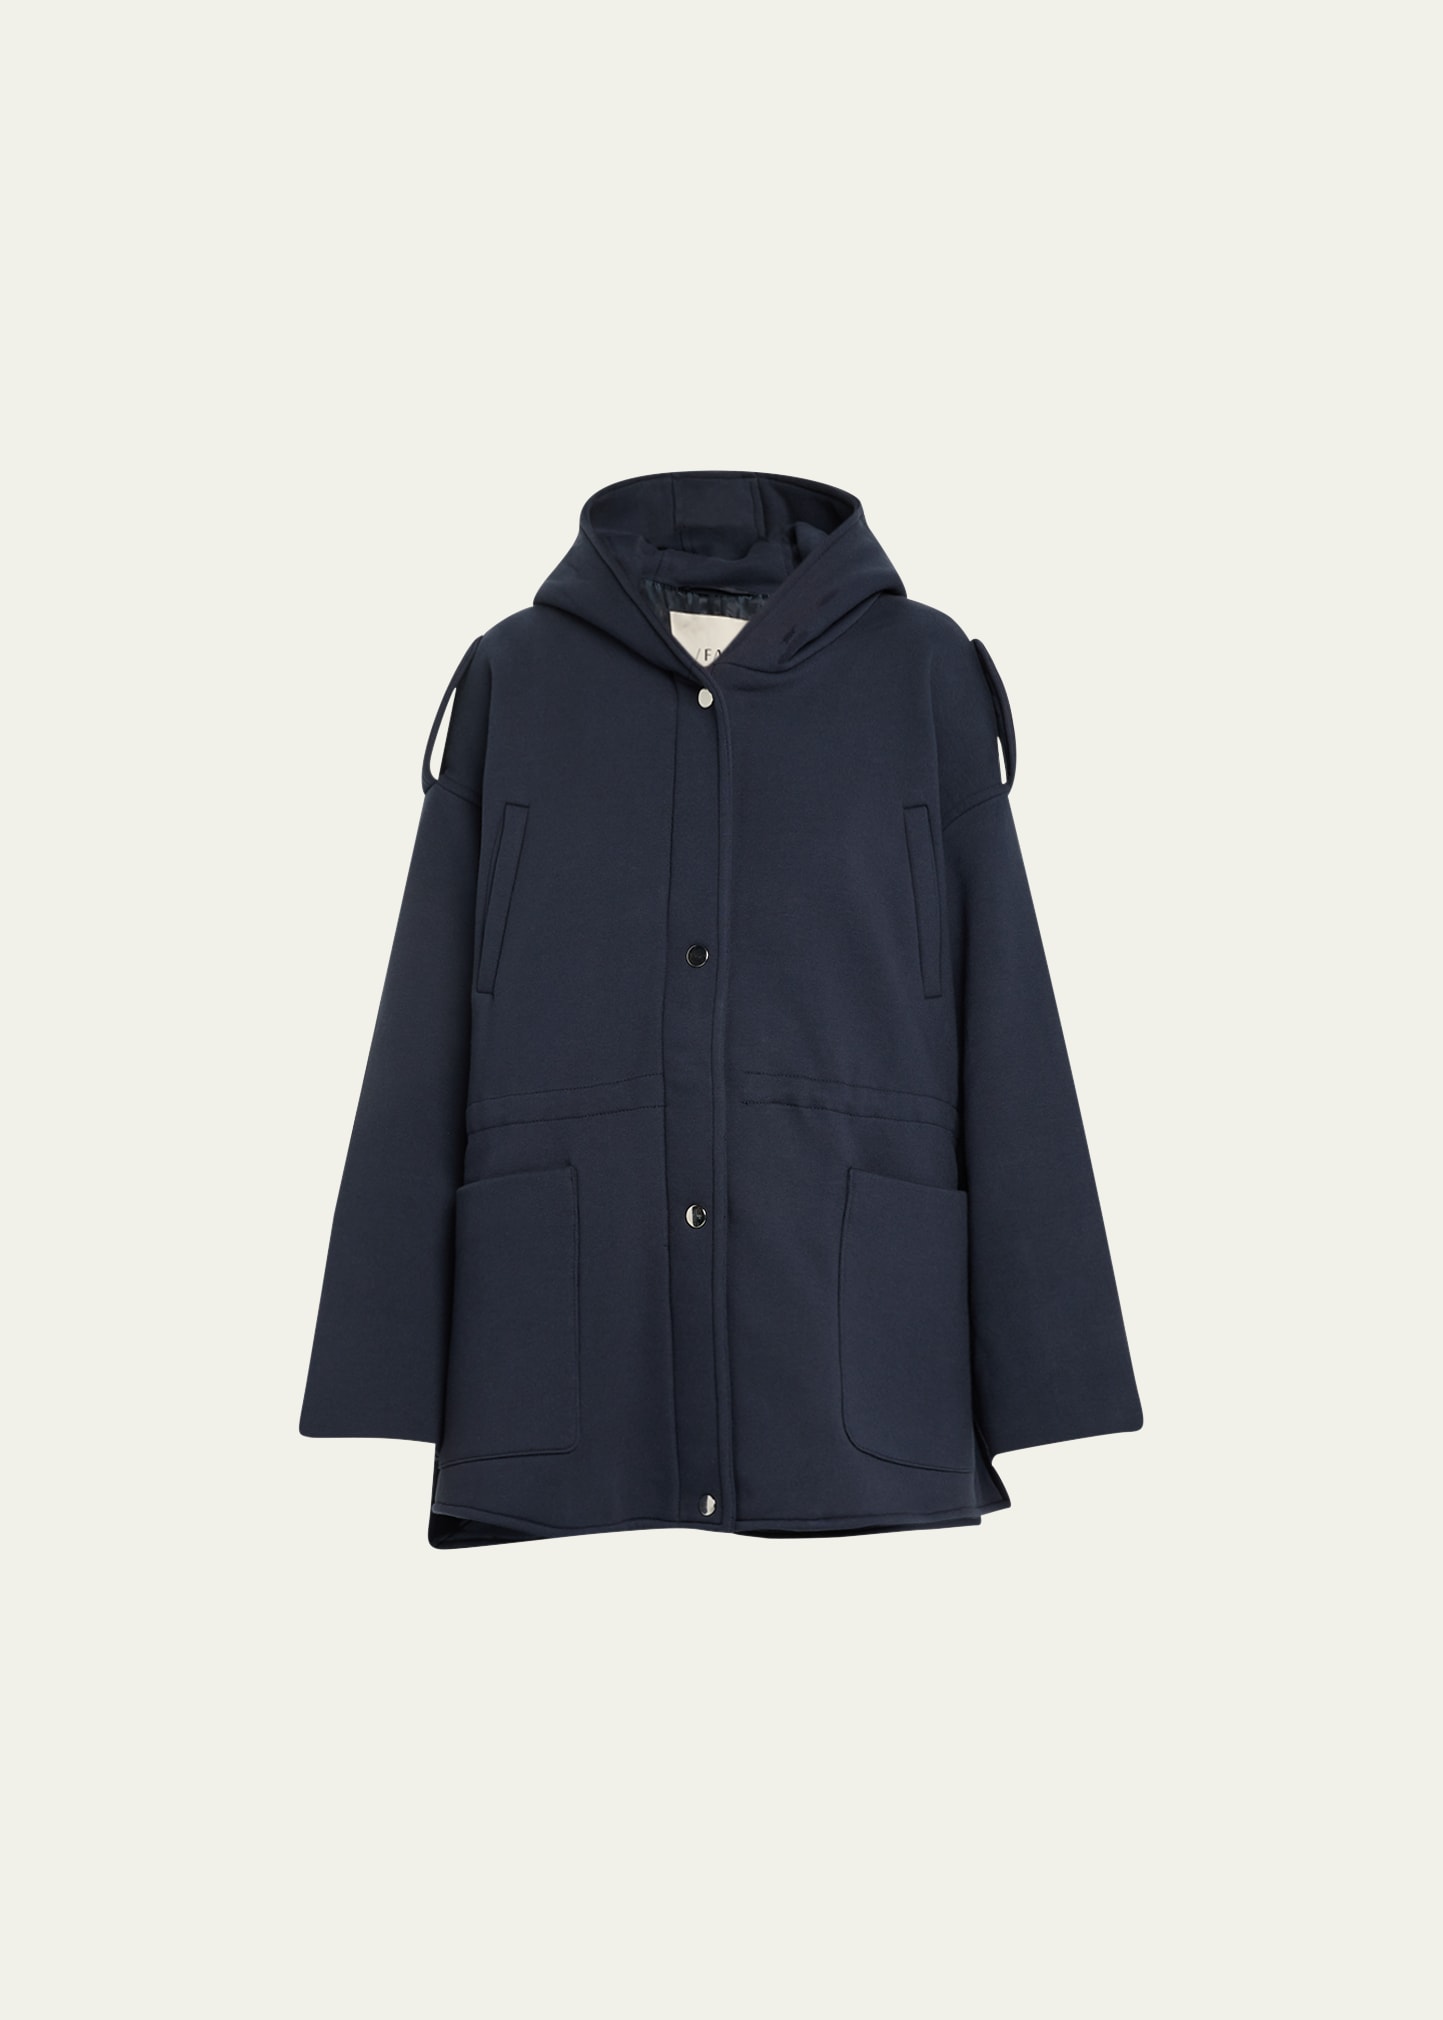 Faz Ruby Hooded Top Coat With Drawcord Waist In Navy